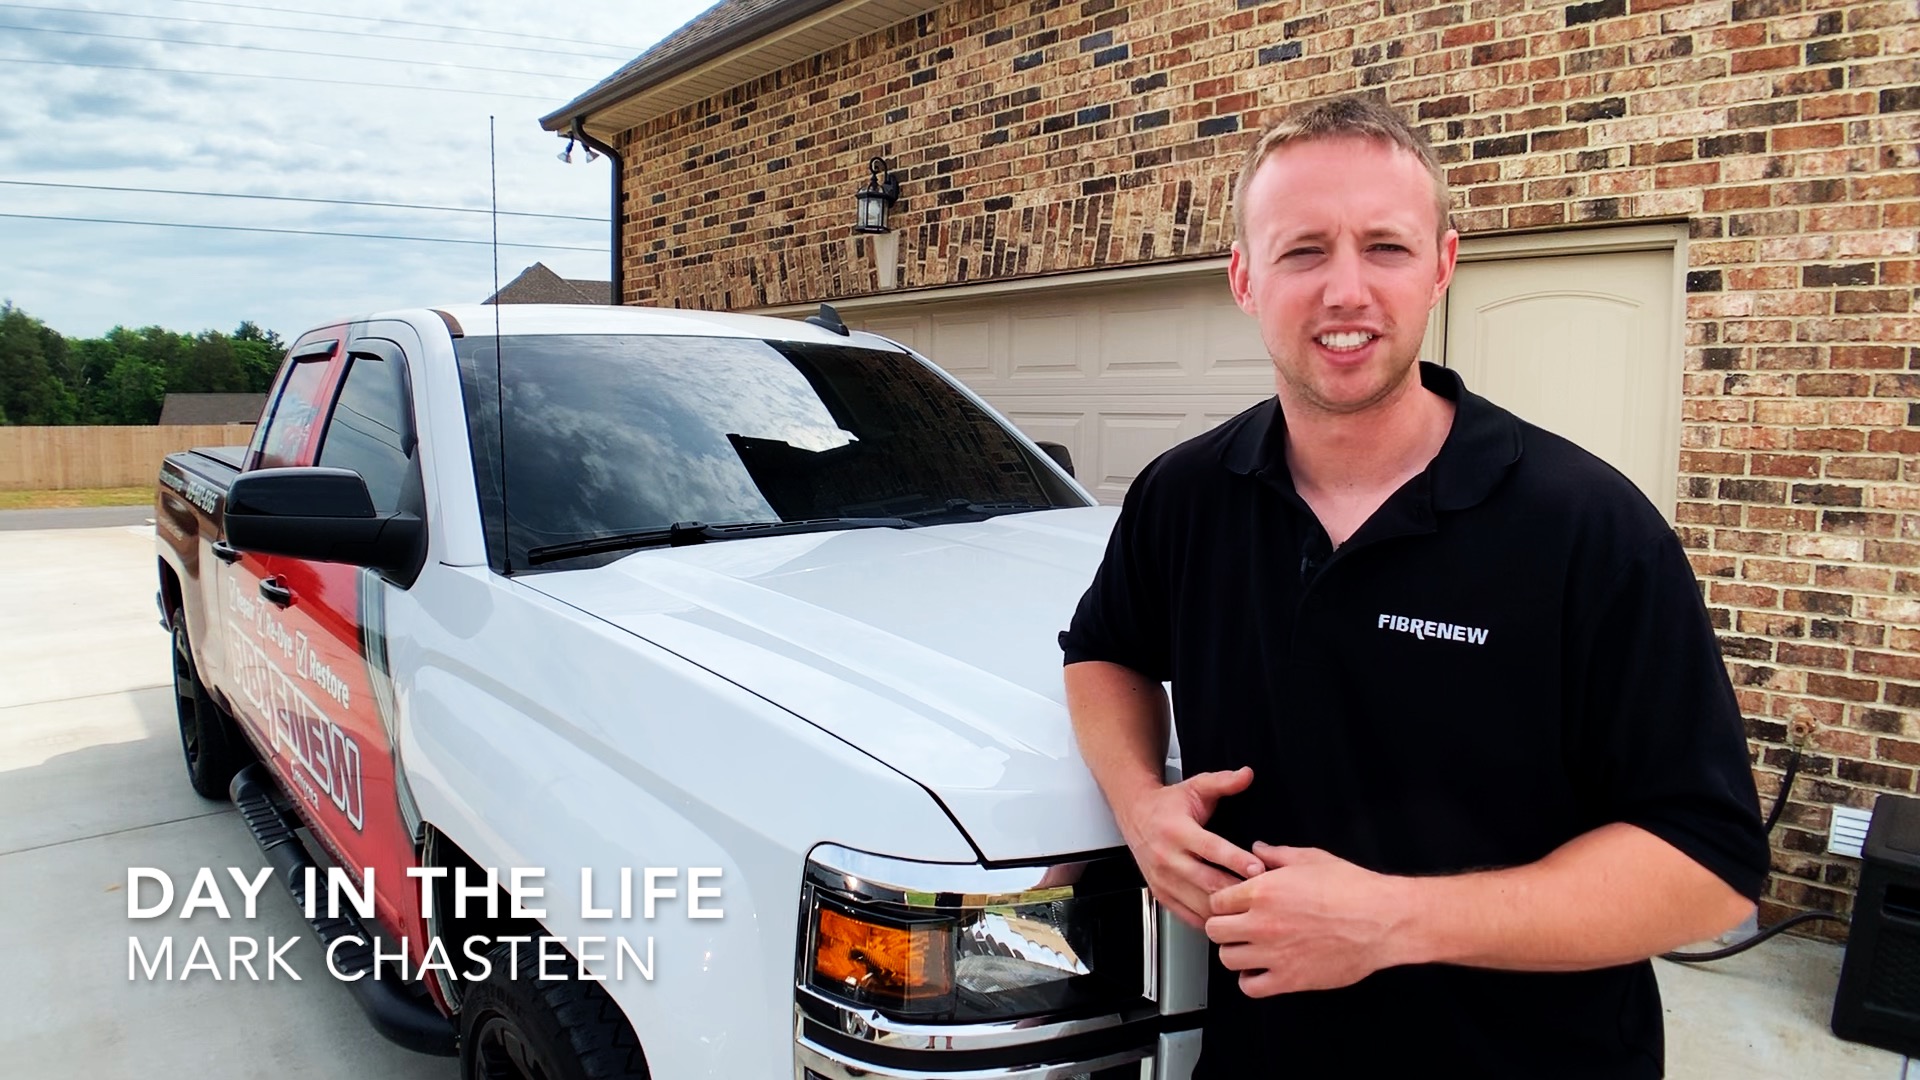 A Day in the Life of a Fibrenew Franchisee - Mark Chasteen (Video)